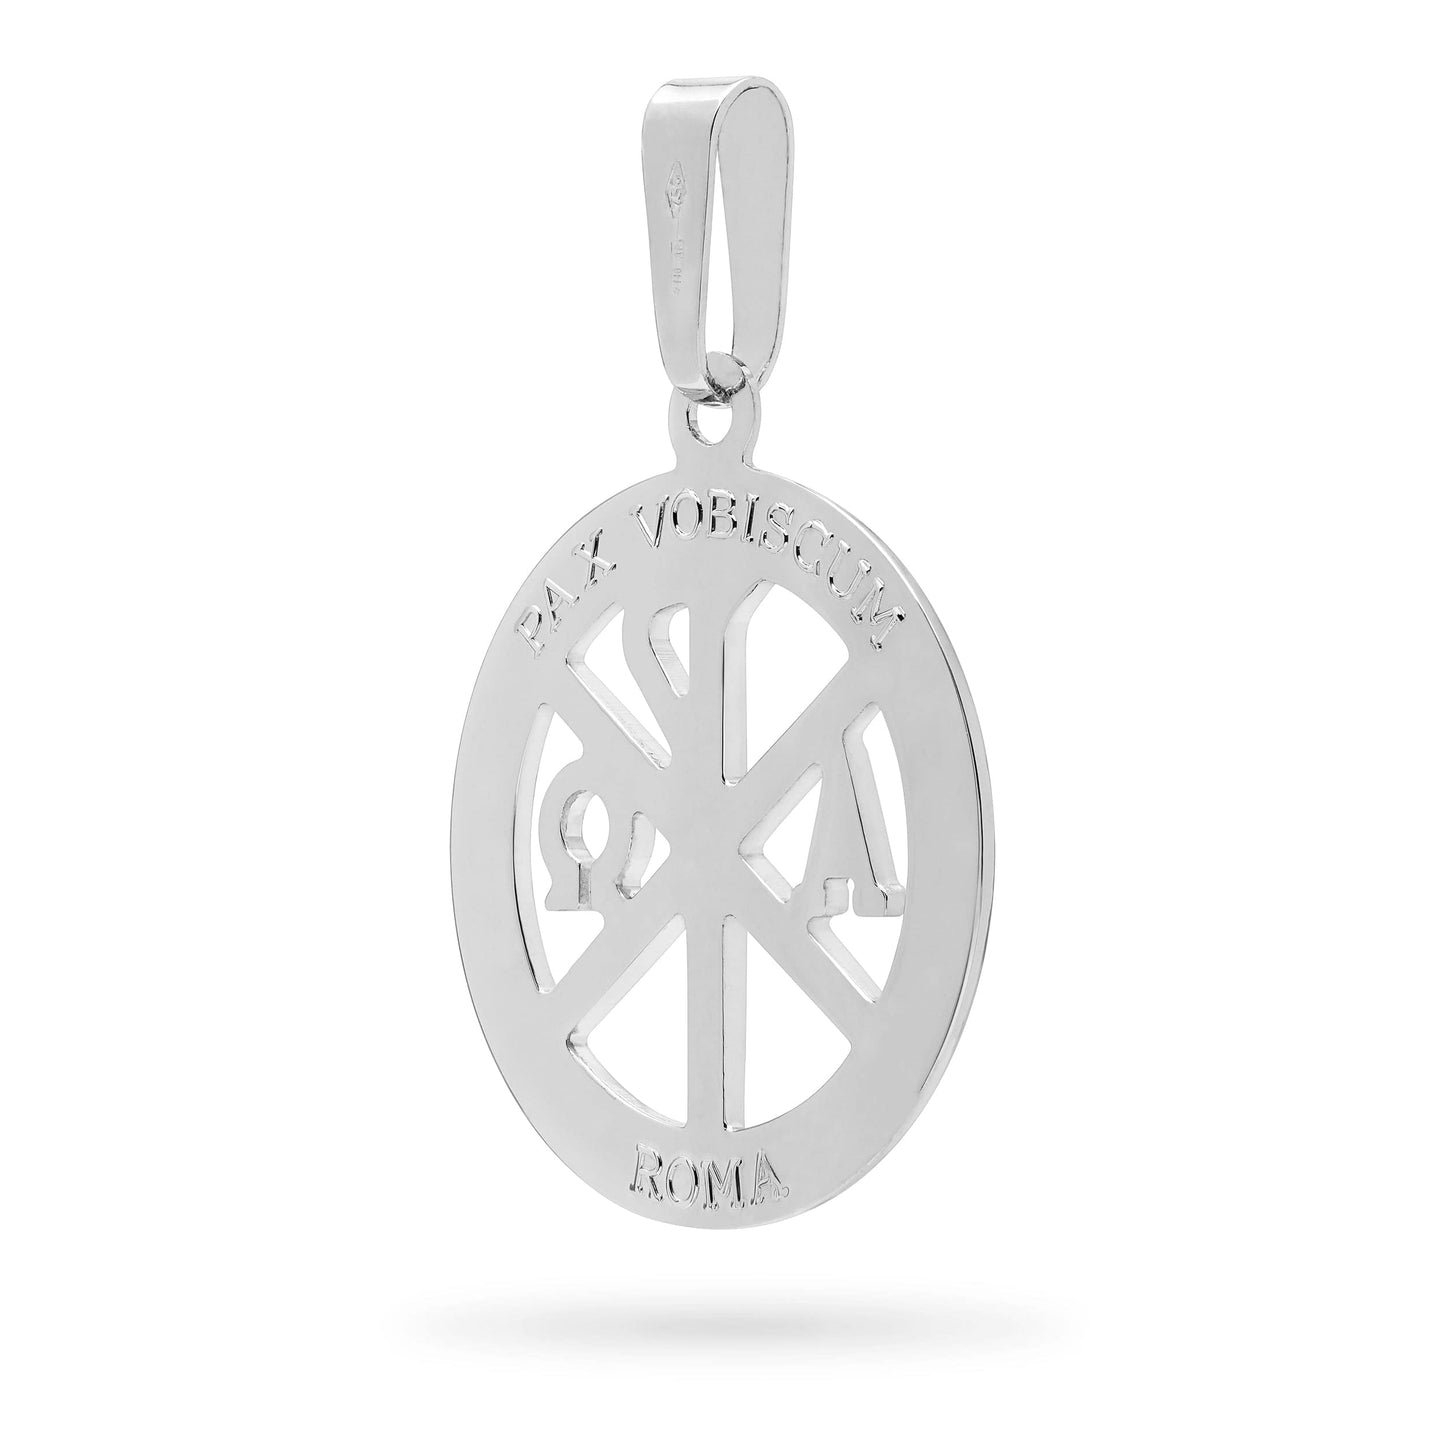 MONDO CATTOLICO Jewelry White Gold Peace Cross medal